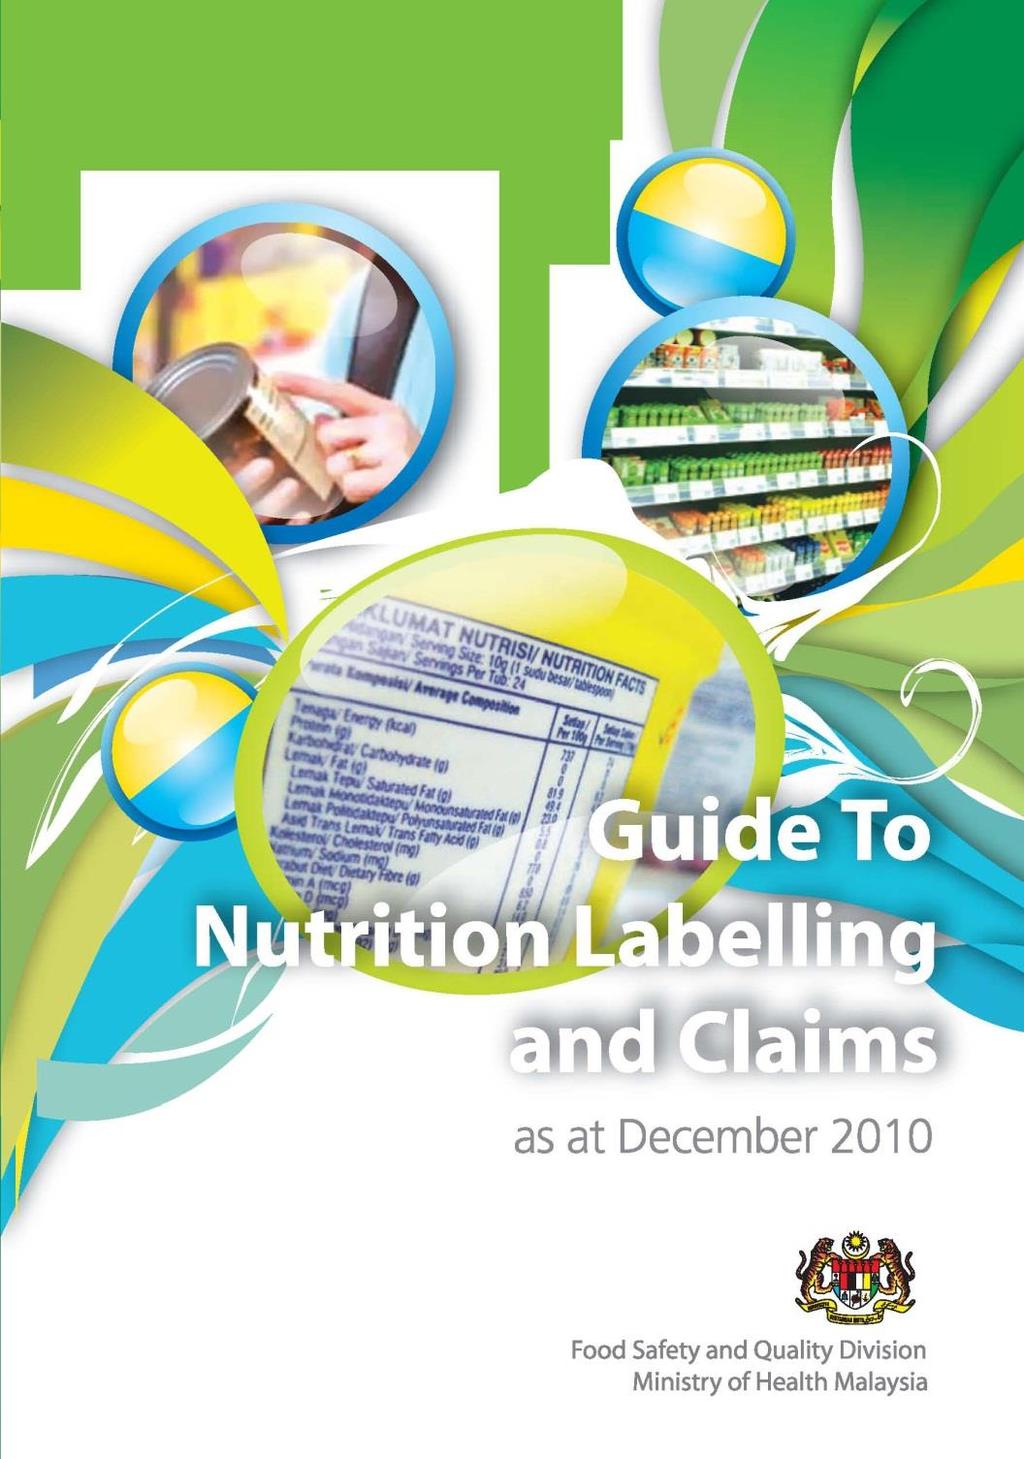 Use application form in Guide Book to assist industry and enforcement officers understand nutritionl labeling and claims regulations